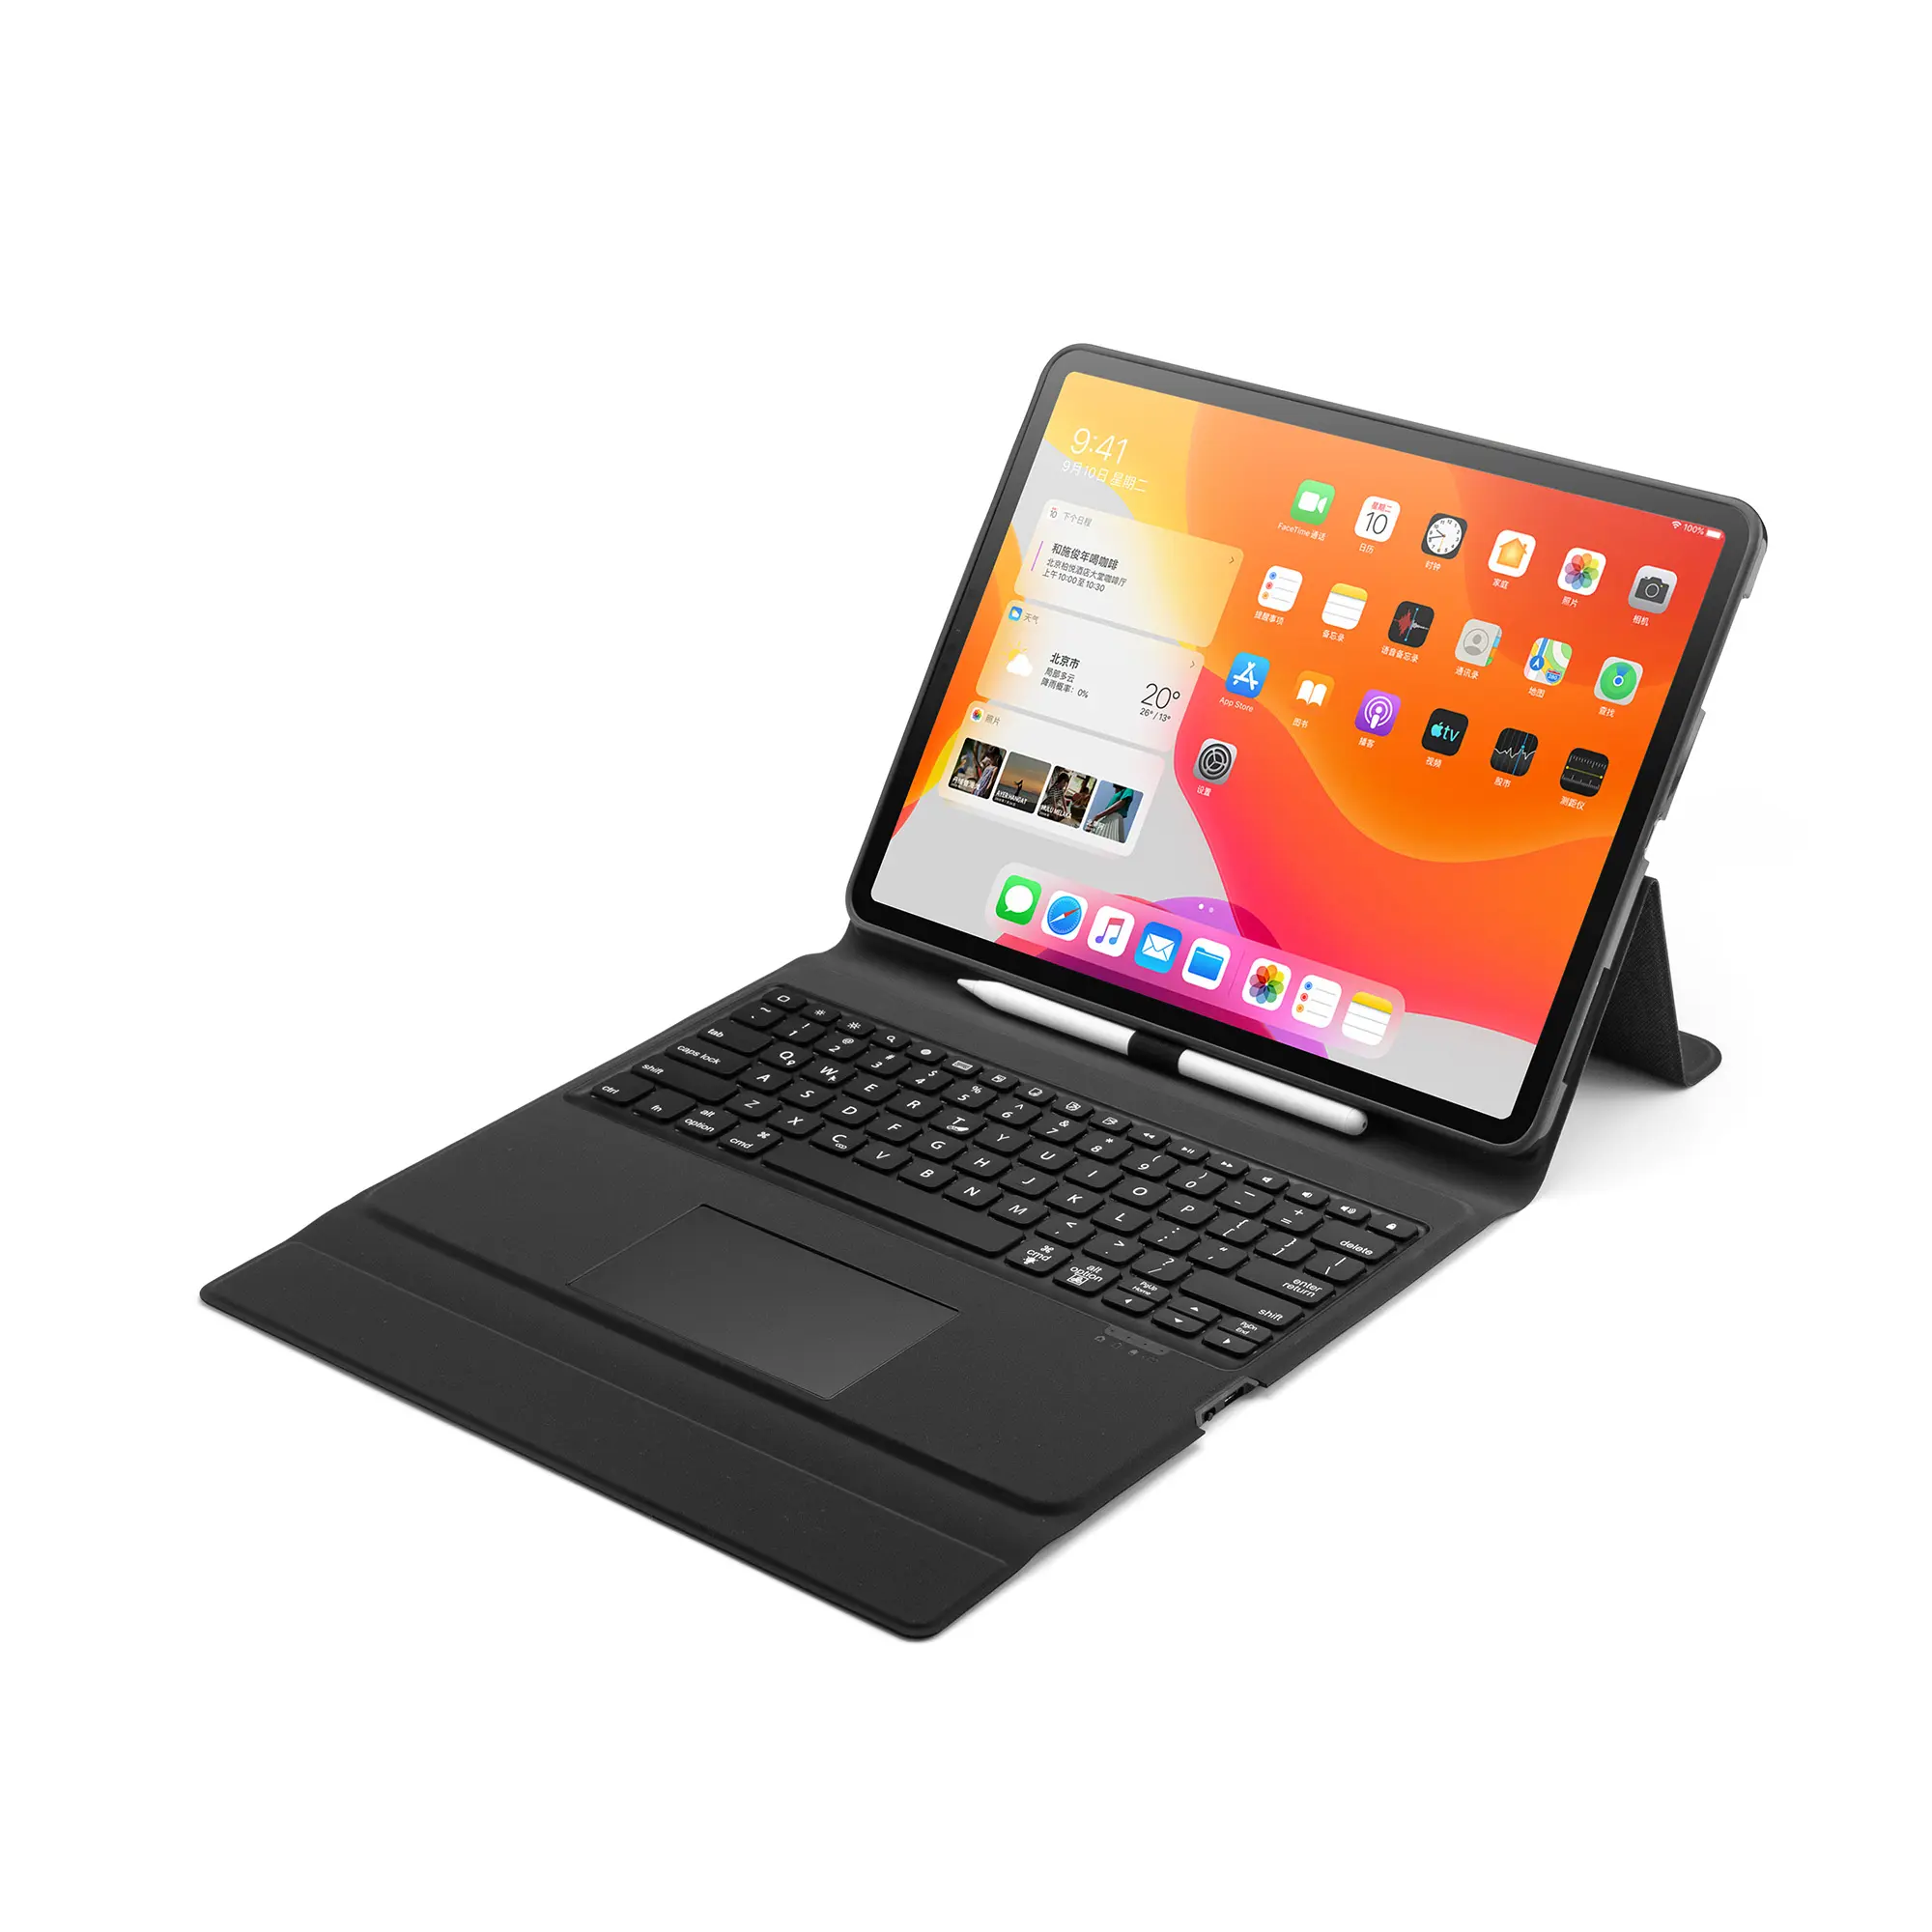 Keyboard Cover for iPad 10.2/10.5/12.9 inch with BT Wireless Keyboard Case for ipad Keyboard Protective Case with Touchpad